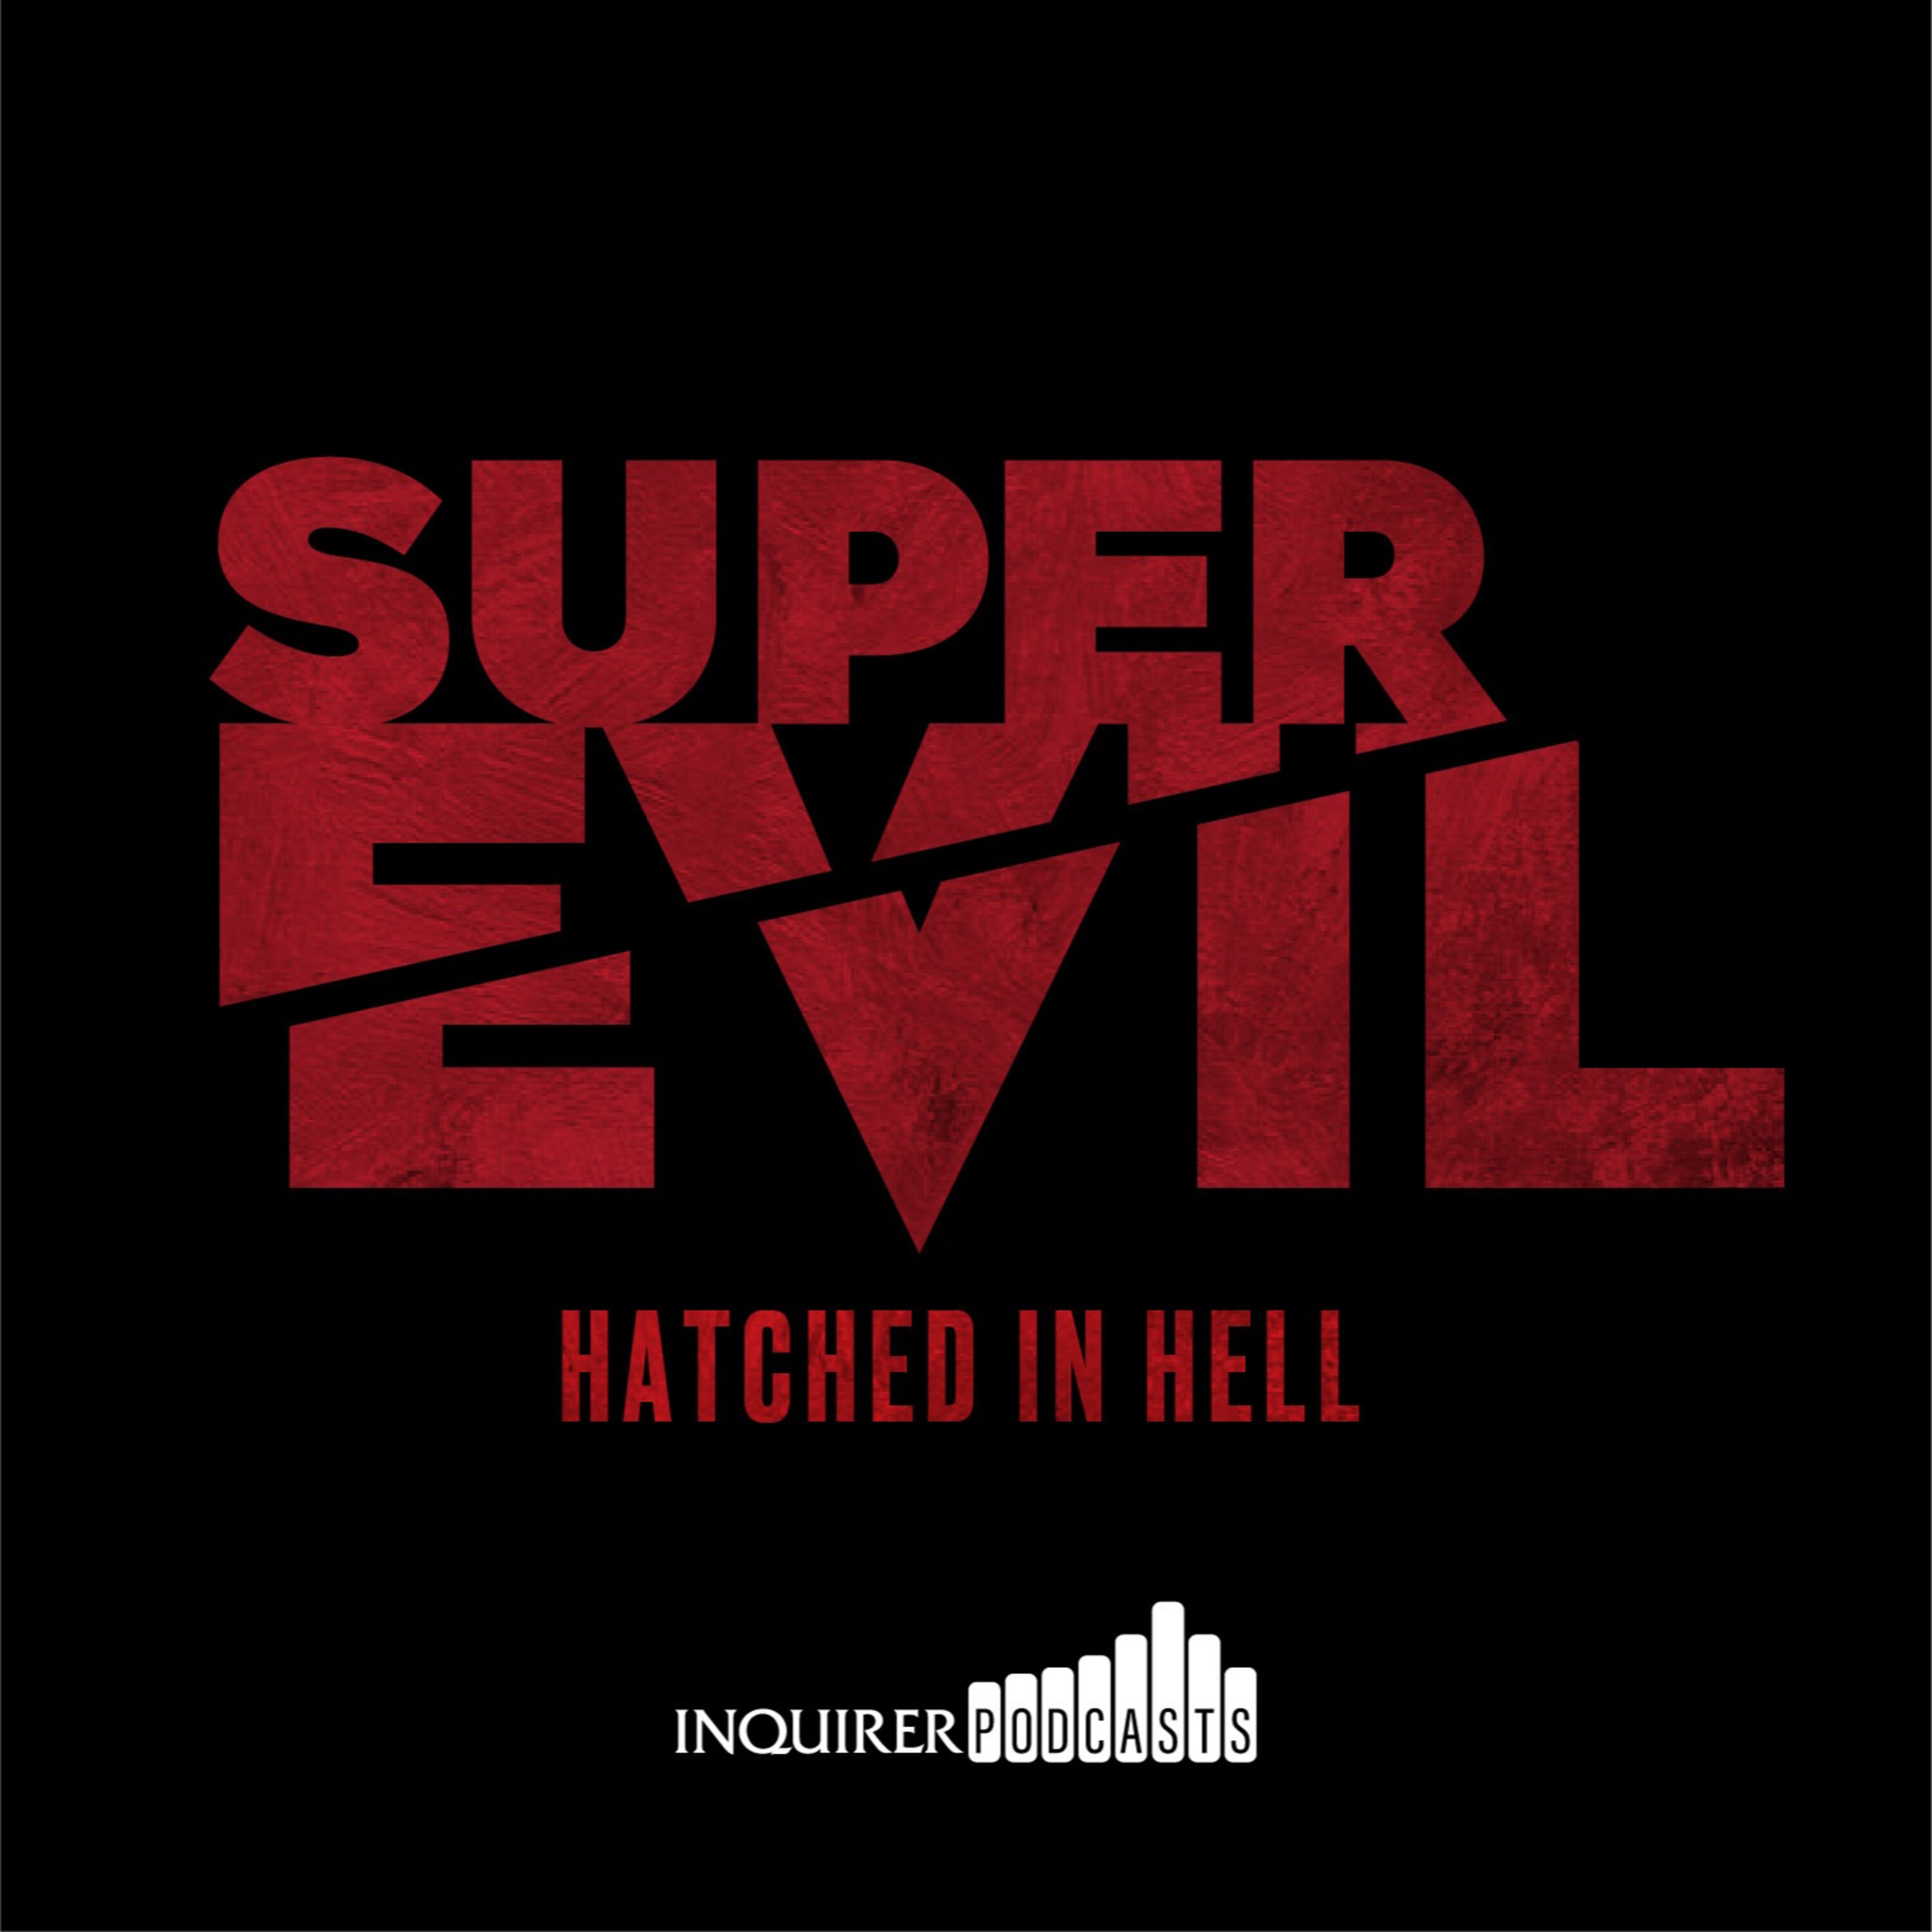 Introducing... Super Evil: Hatched in Hell, a new Inquirer Podcast